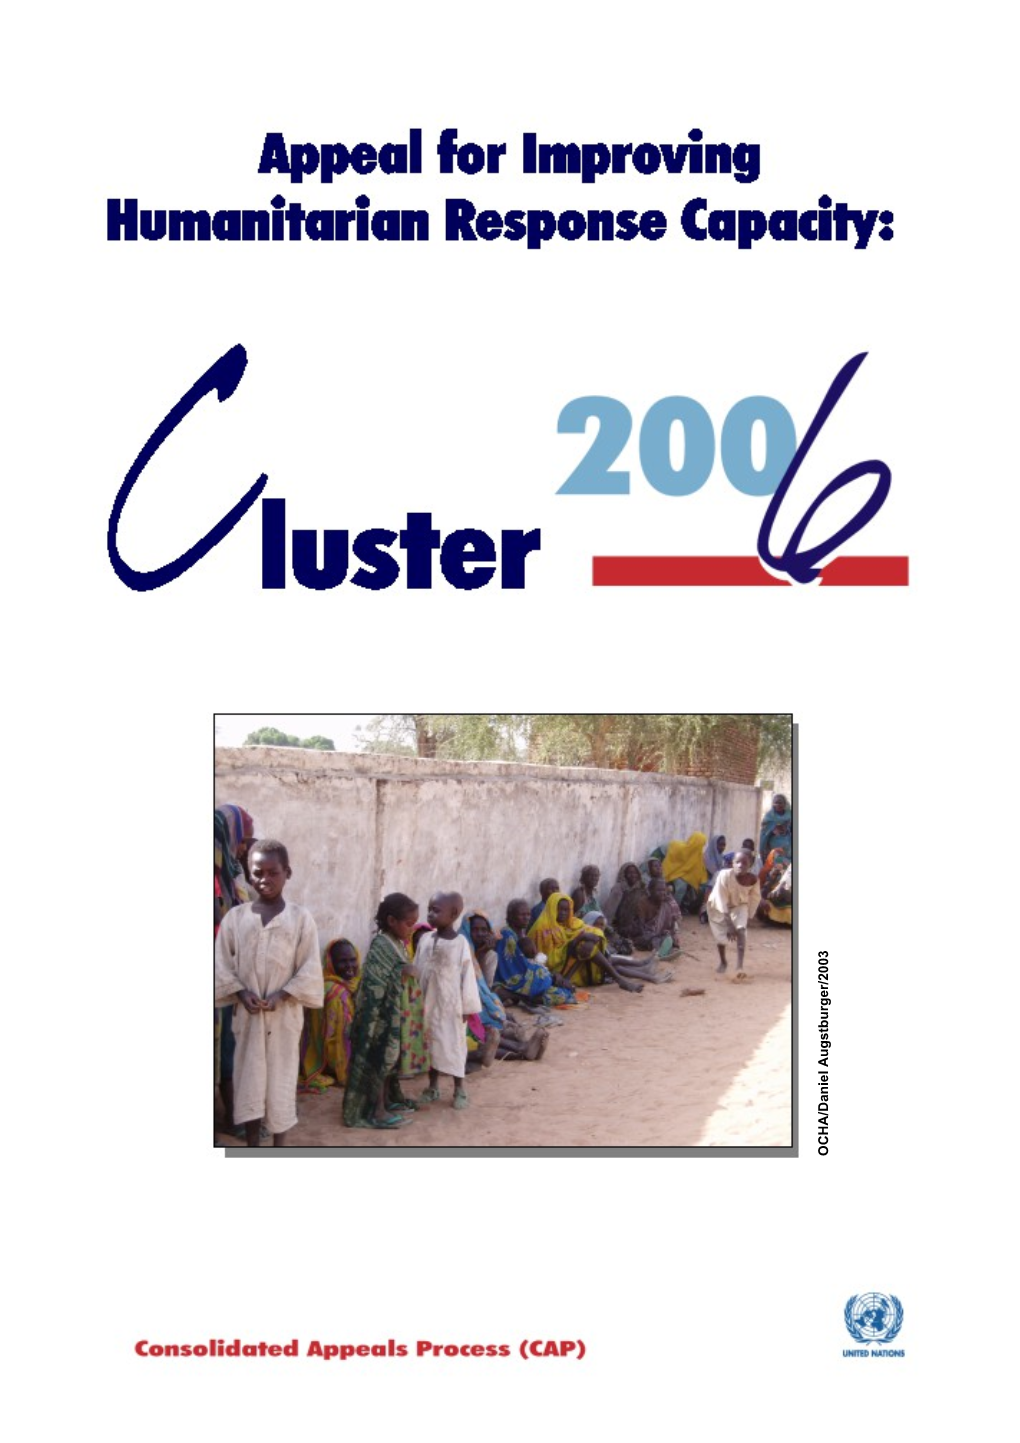 Cluster 2006 - Appeal for Improving Humanitarian Response Capacity (Word)